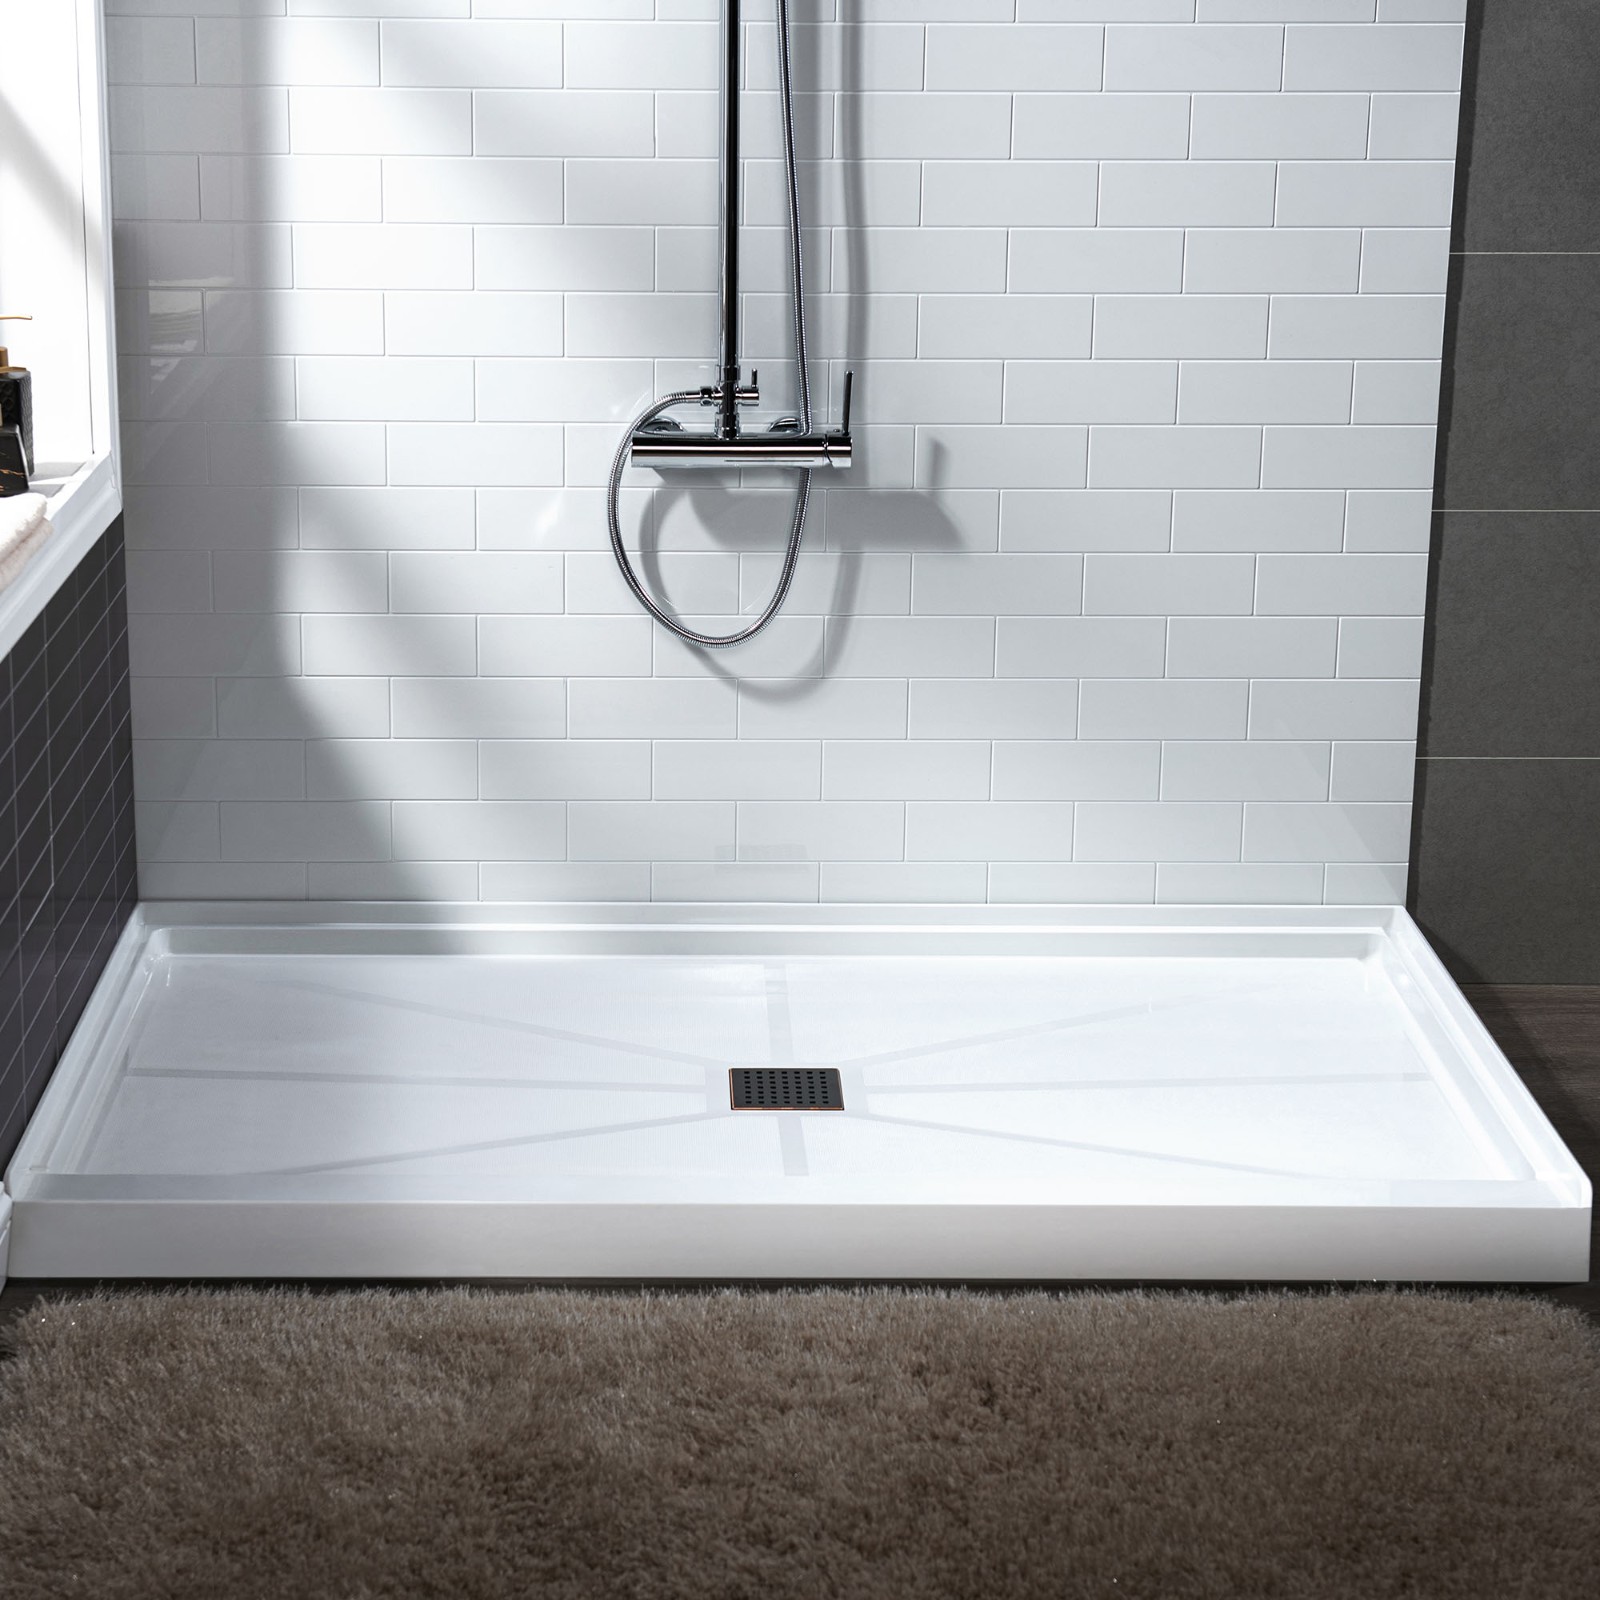  WOODBRIDGE SBR6034-1000C-ORB SolidSurface Shower Base with Recessed Trench Side Including Oil Rubbed Bronze Linear Cover, 60